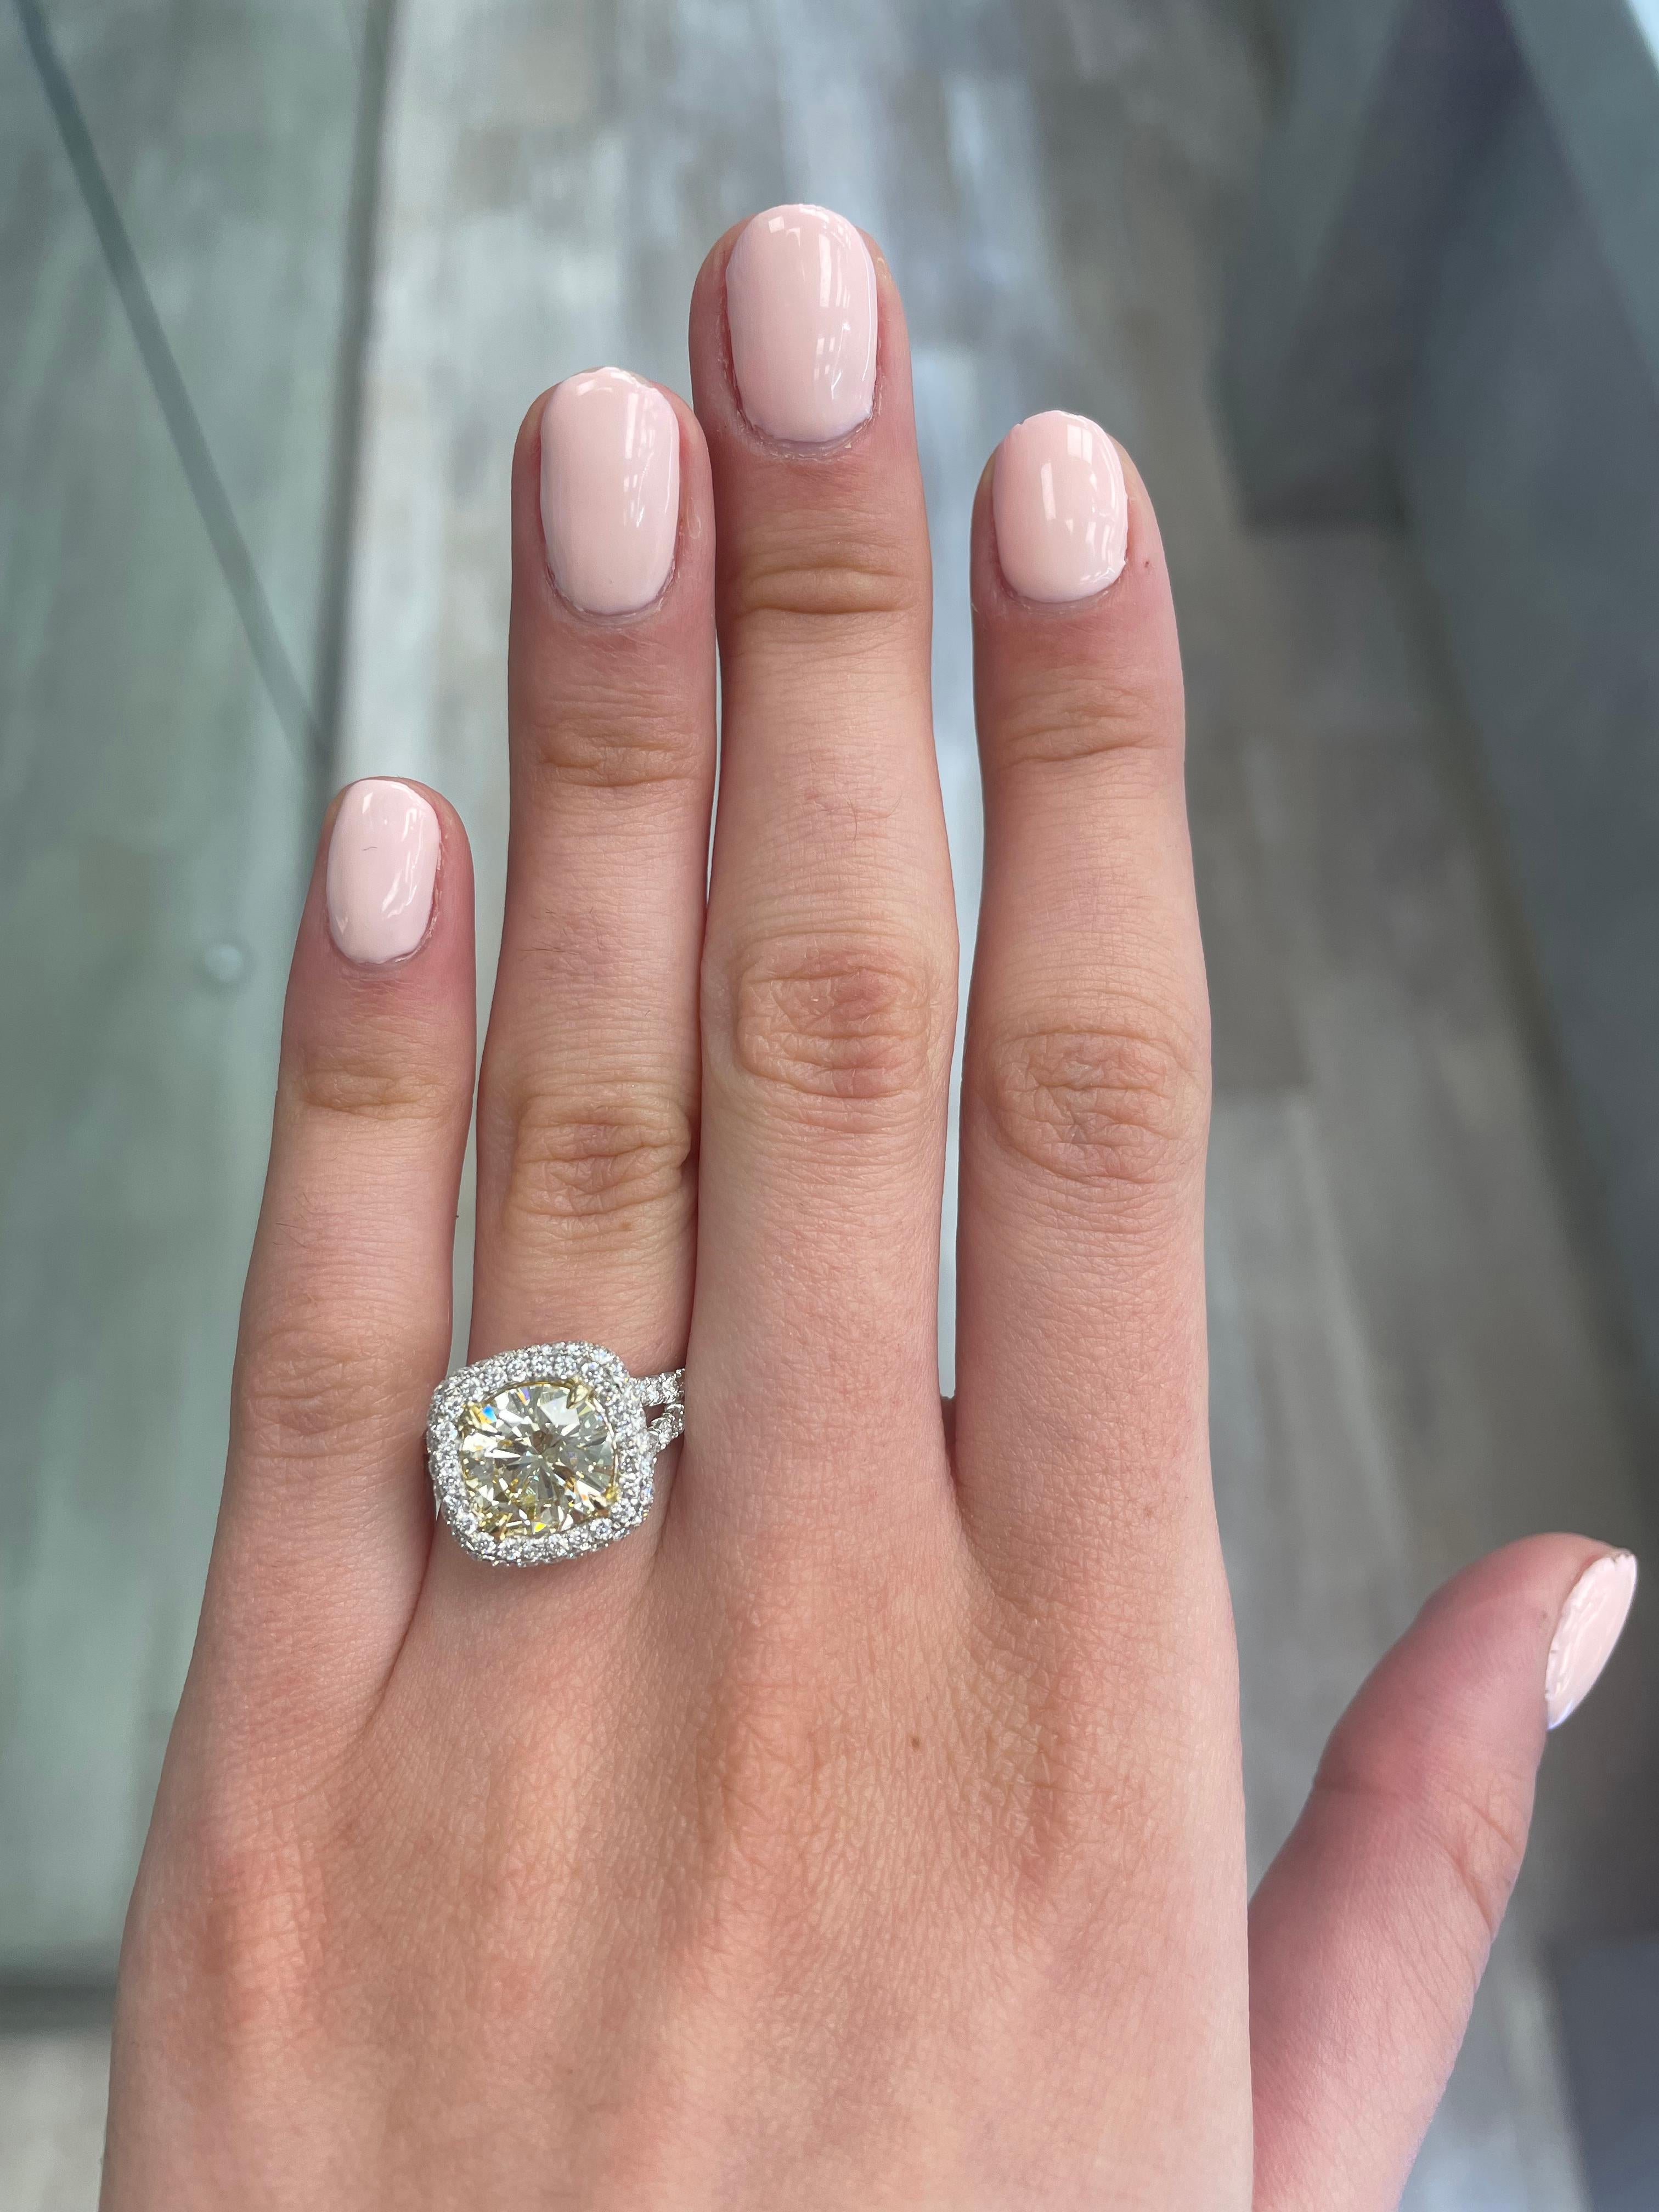 Stunning modern EGL certified yellow diamond with halo ring, two-tone 18k yellow and white gold, split shank. By Alexander Beverly Hills
3.37 carats total diamond weight.
2.63 carat round cut Light Yellow color and SI2 clarity diamond, EGL graded.